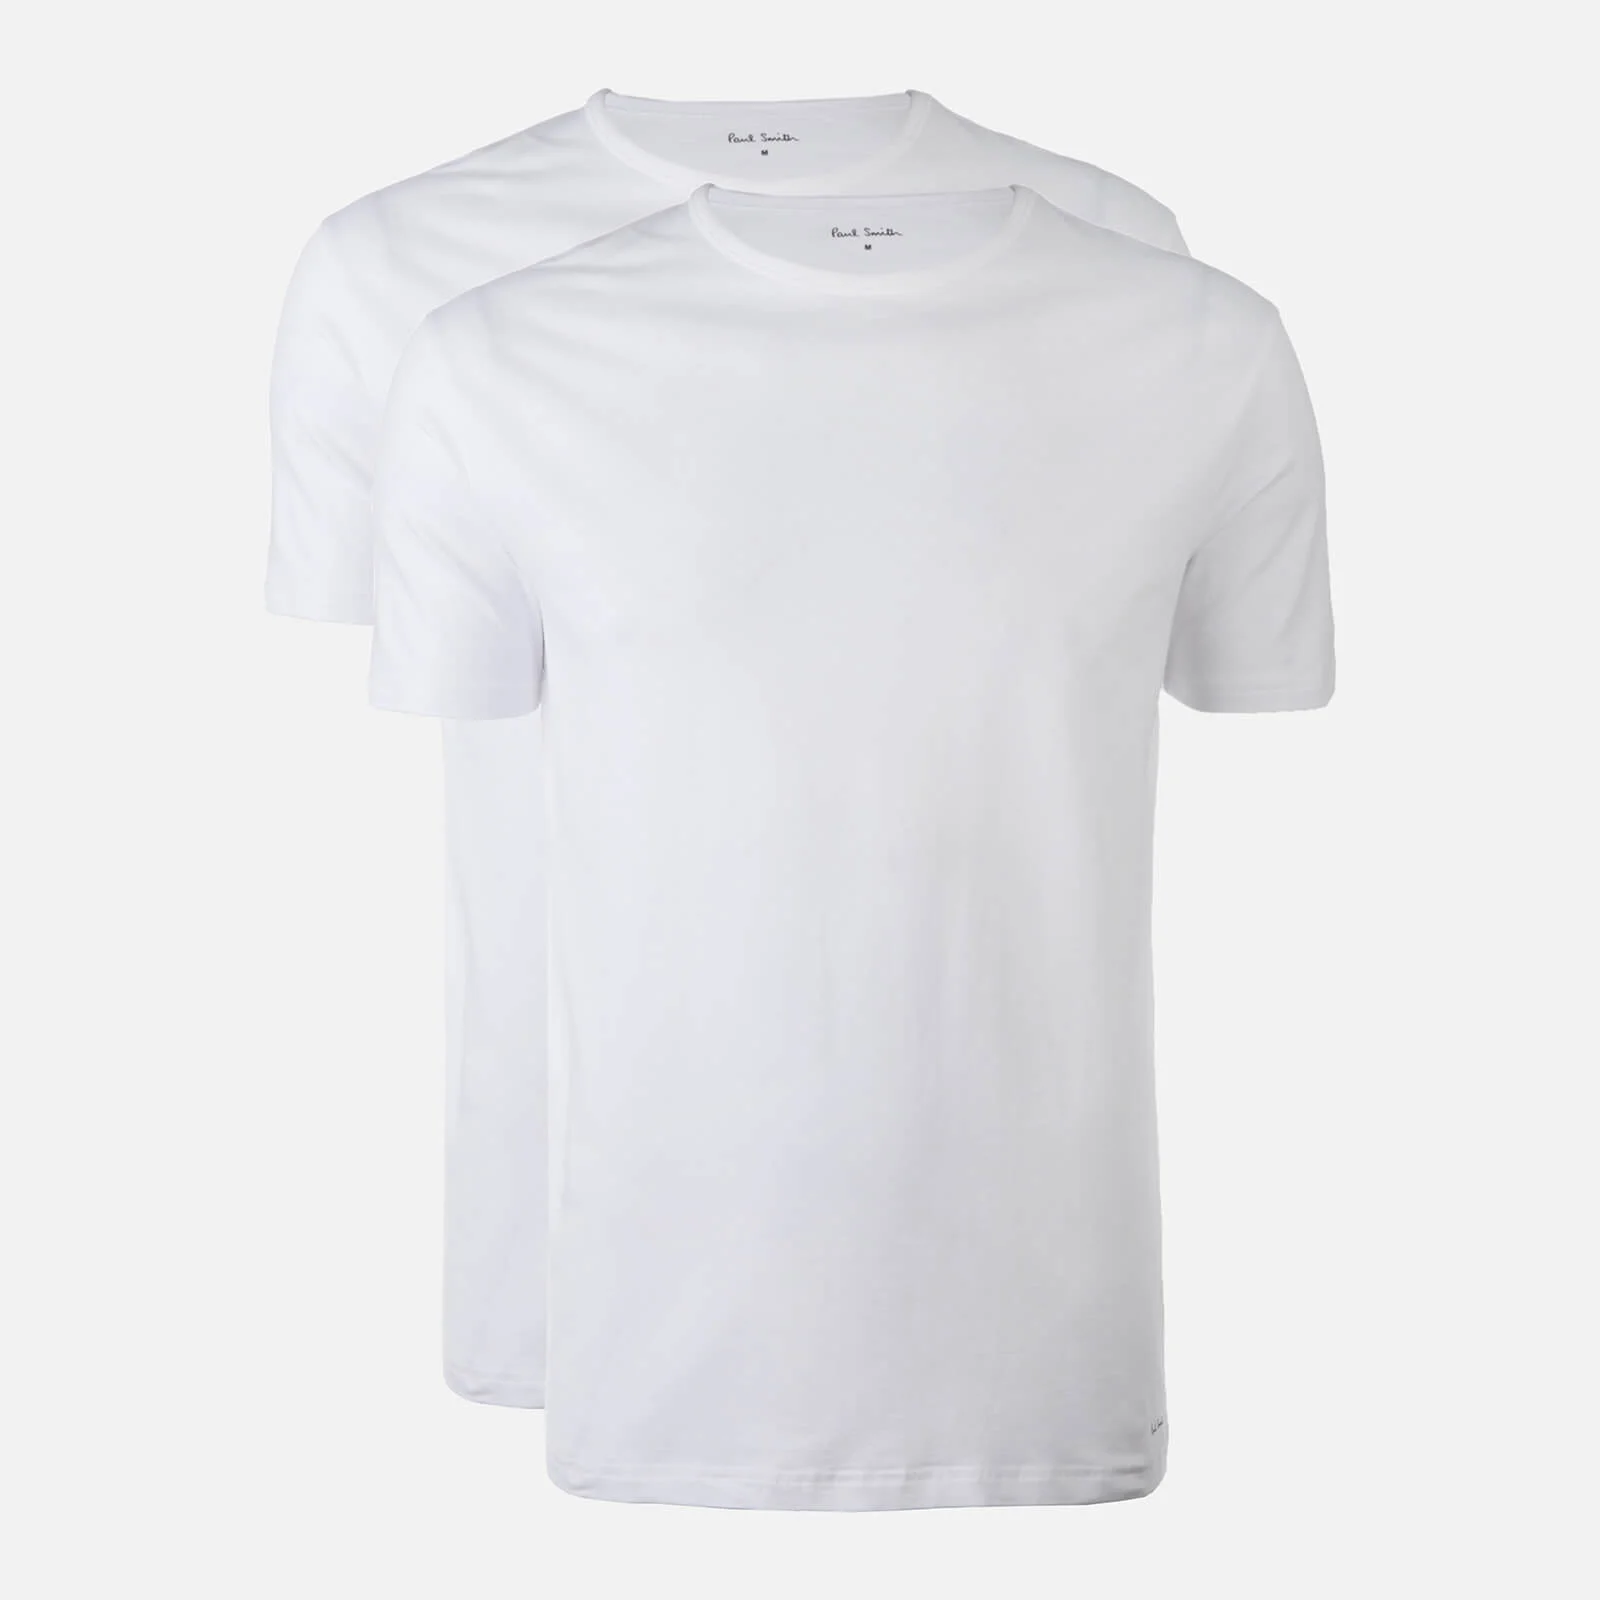 PS Paul Smith Men's 2 Pack T-Shirts - White Image 1